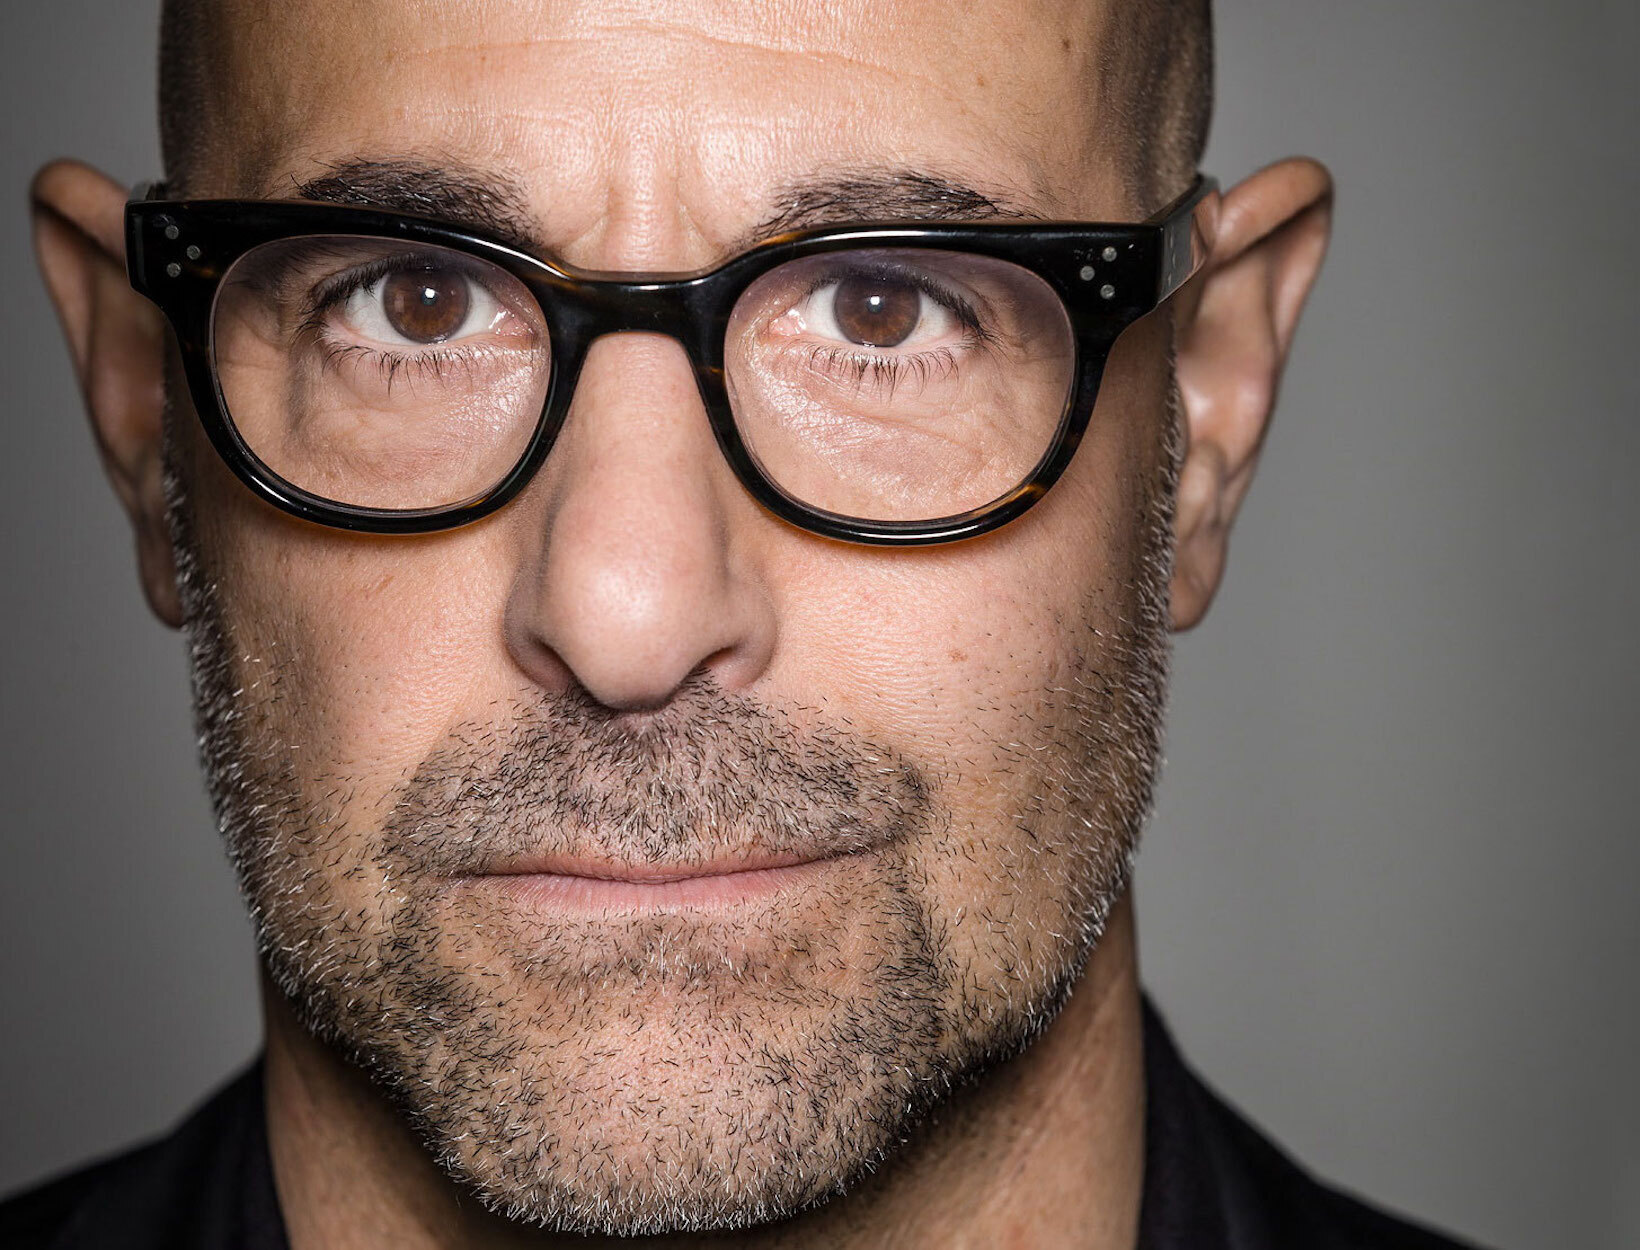 Gwyneth Paltrow x Stanley Tucci For the Love of Food goop image